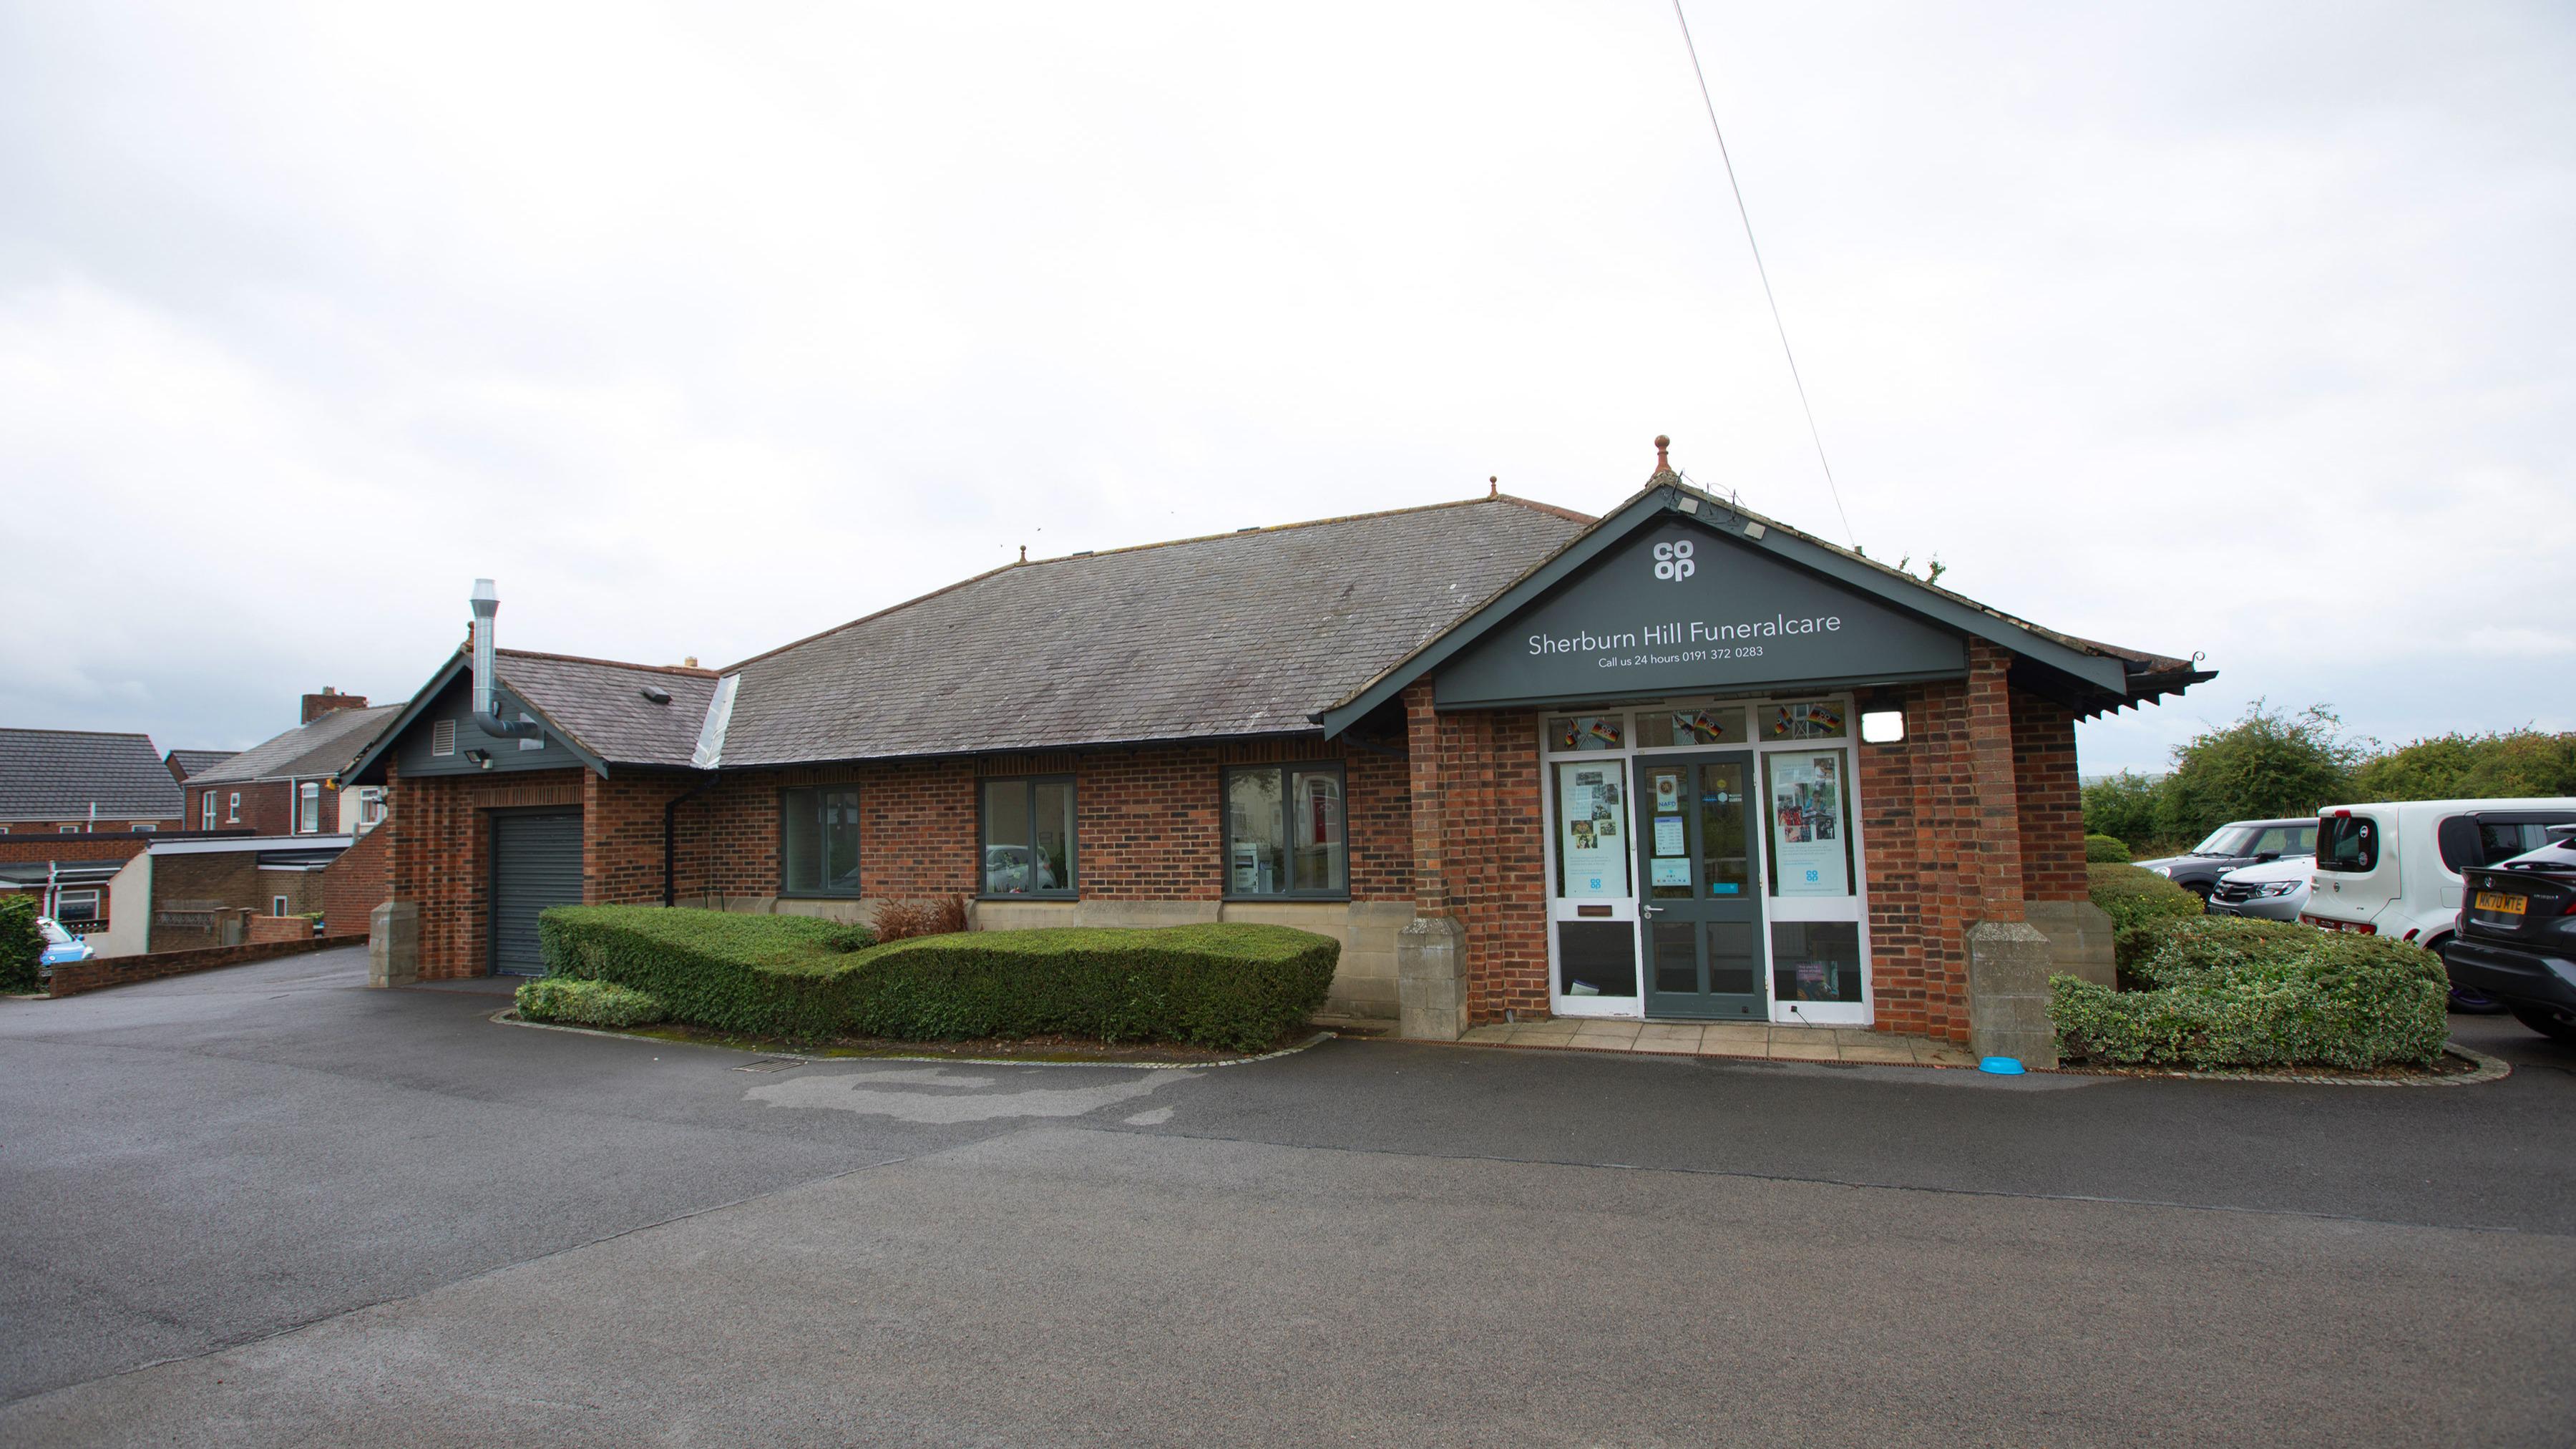 Images Sherburn Hill Funeralcare